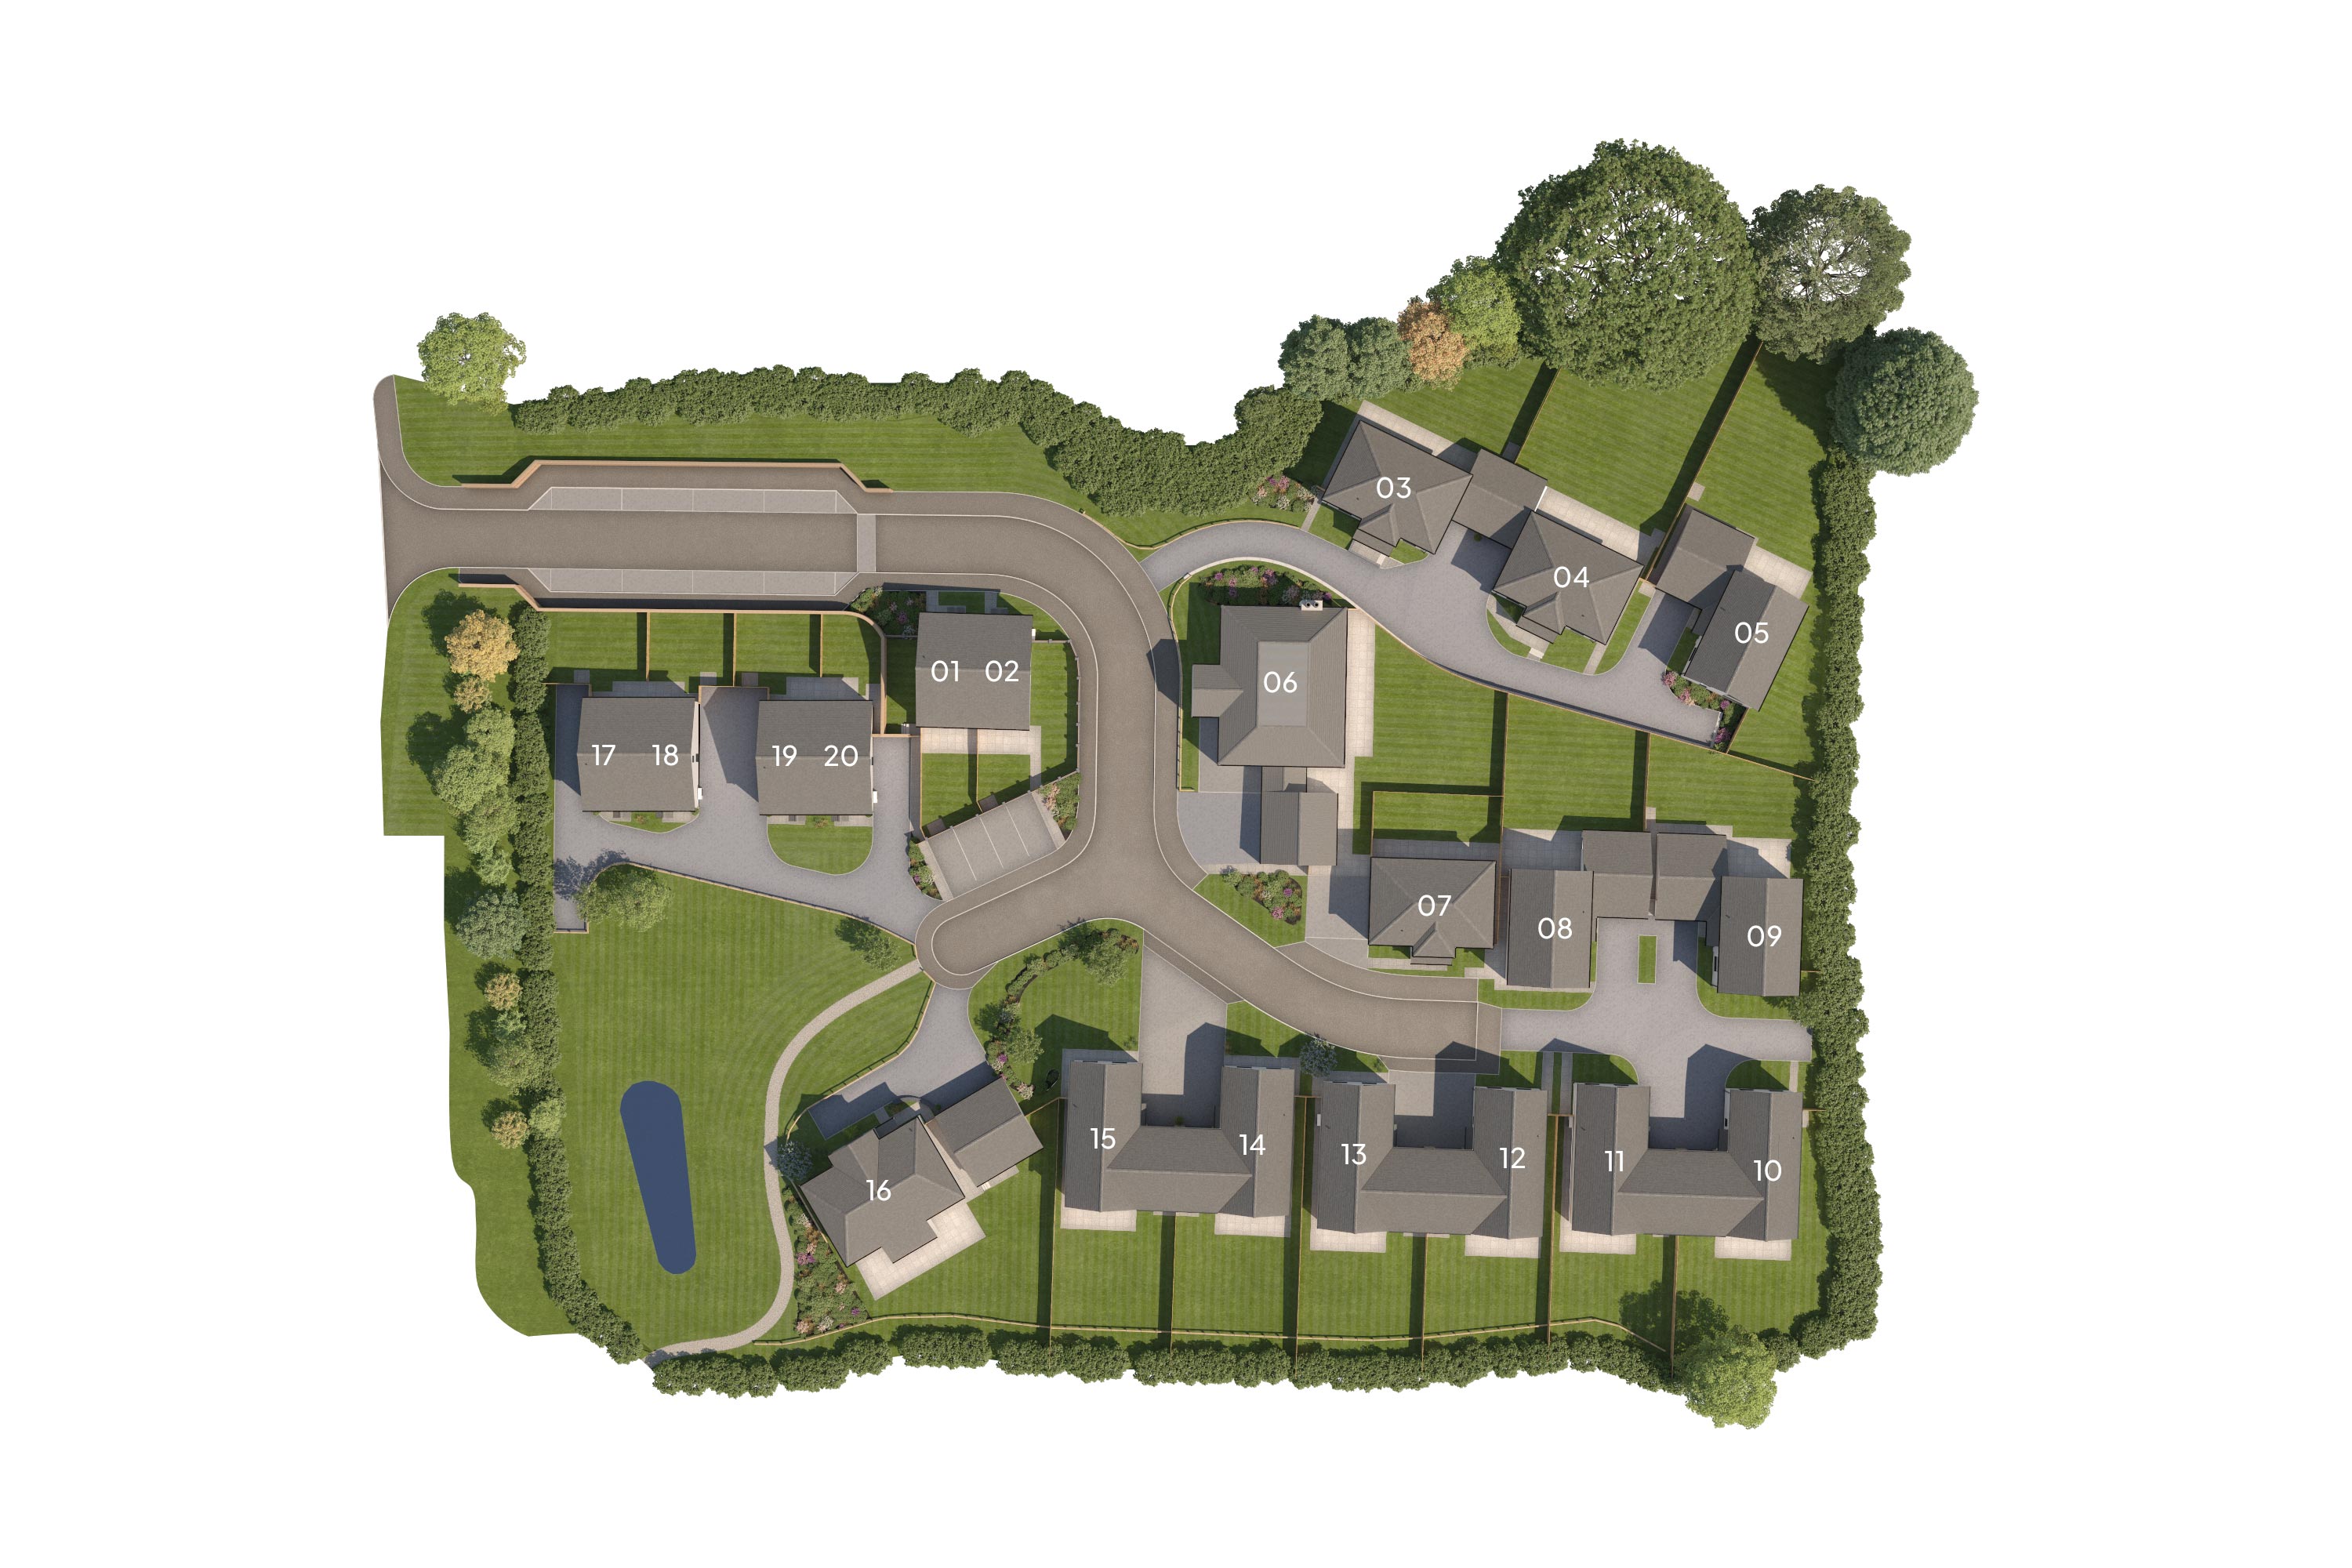 Site Map of St Mary's Close Housing Development at Bishop's Nympton in North Devon